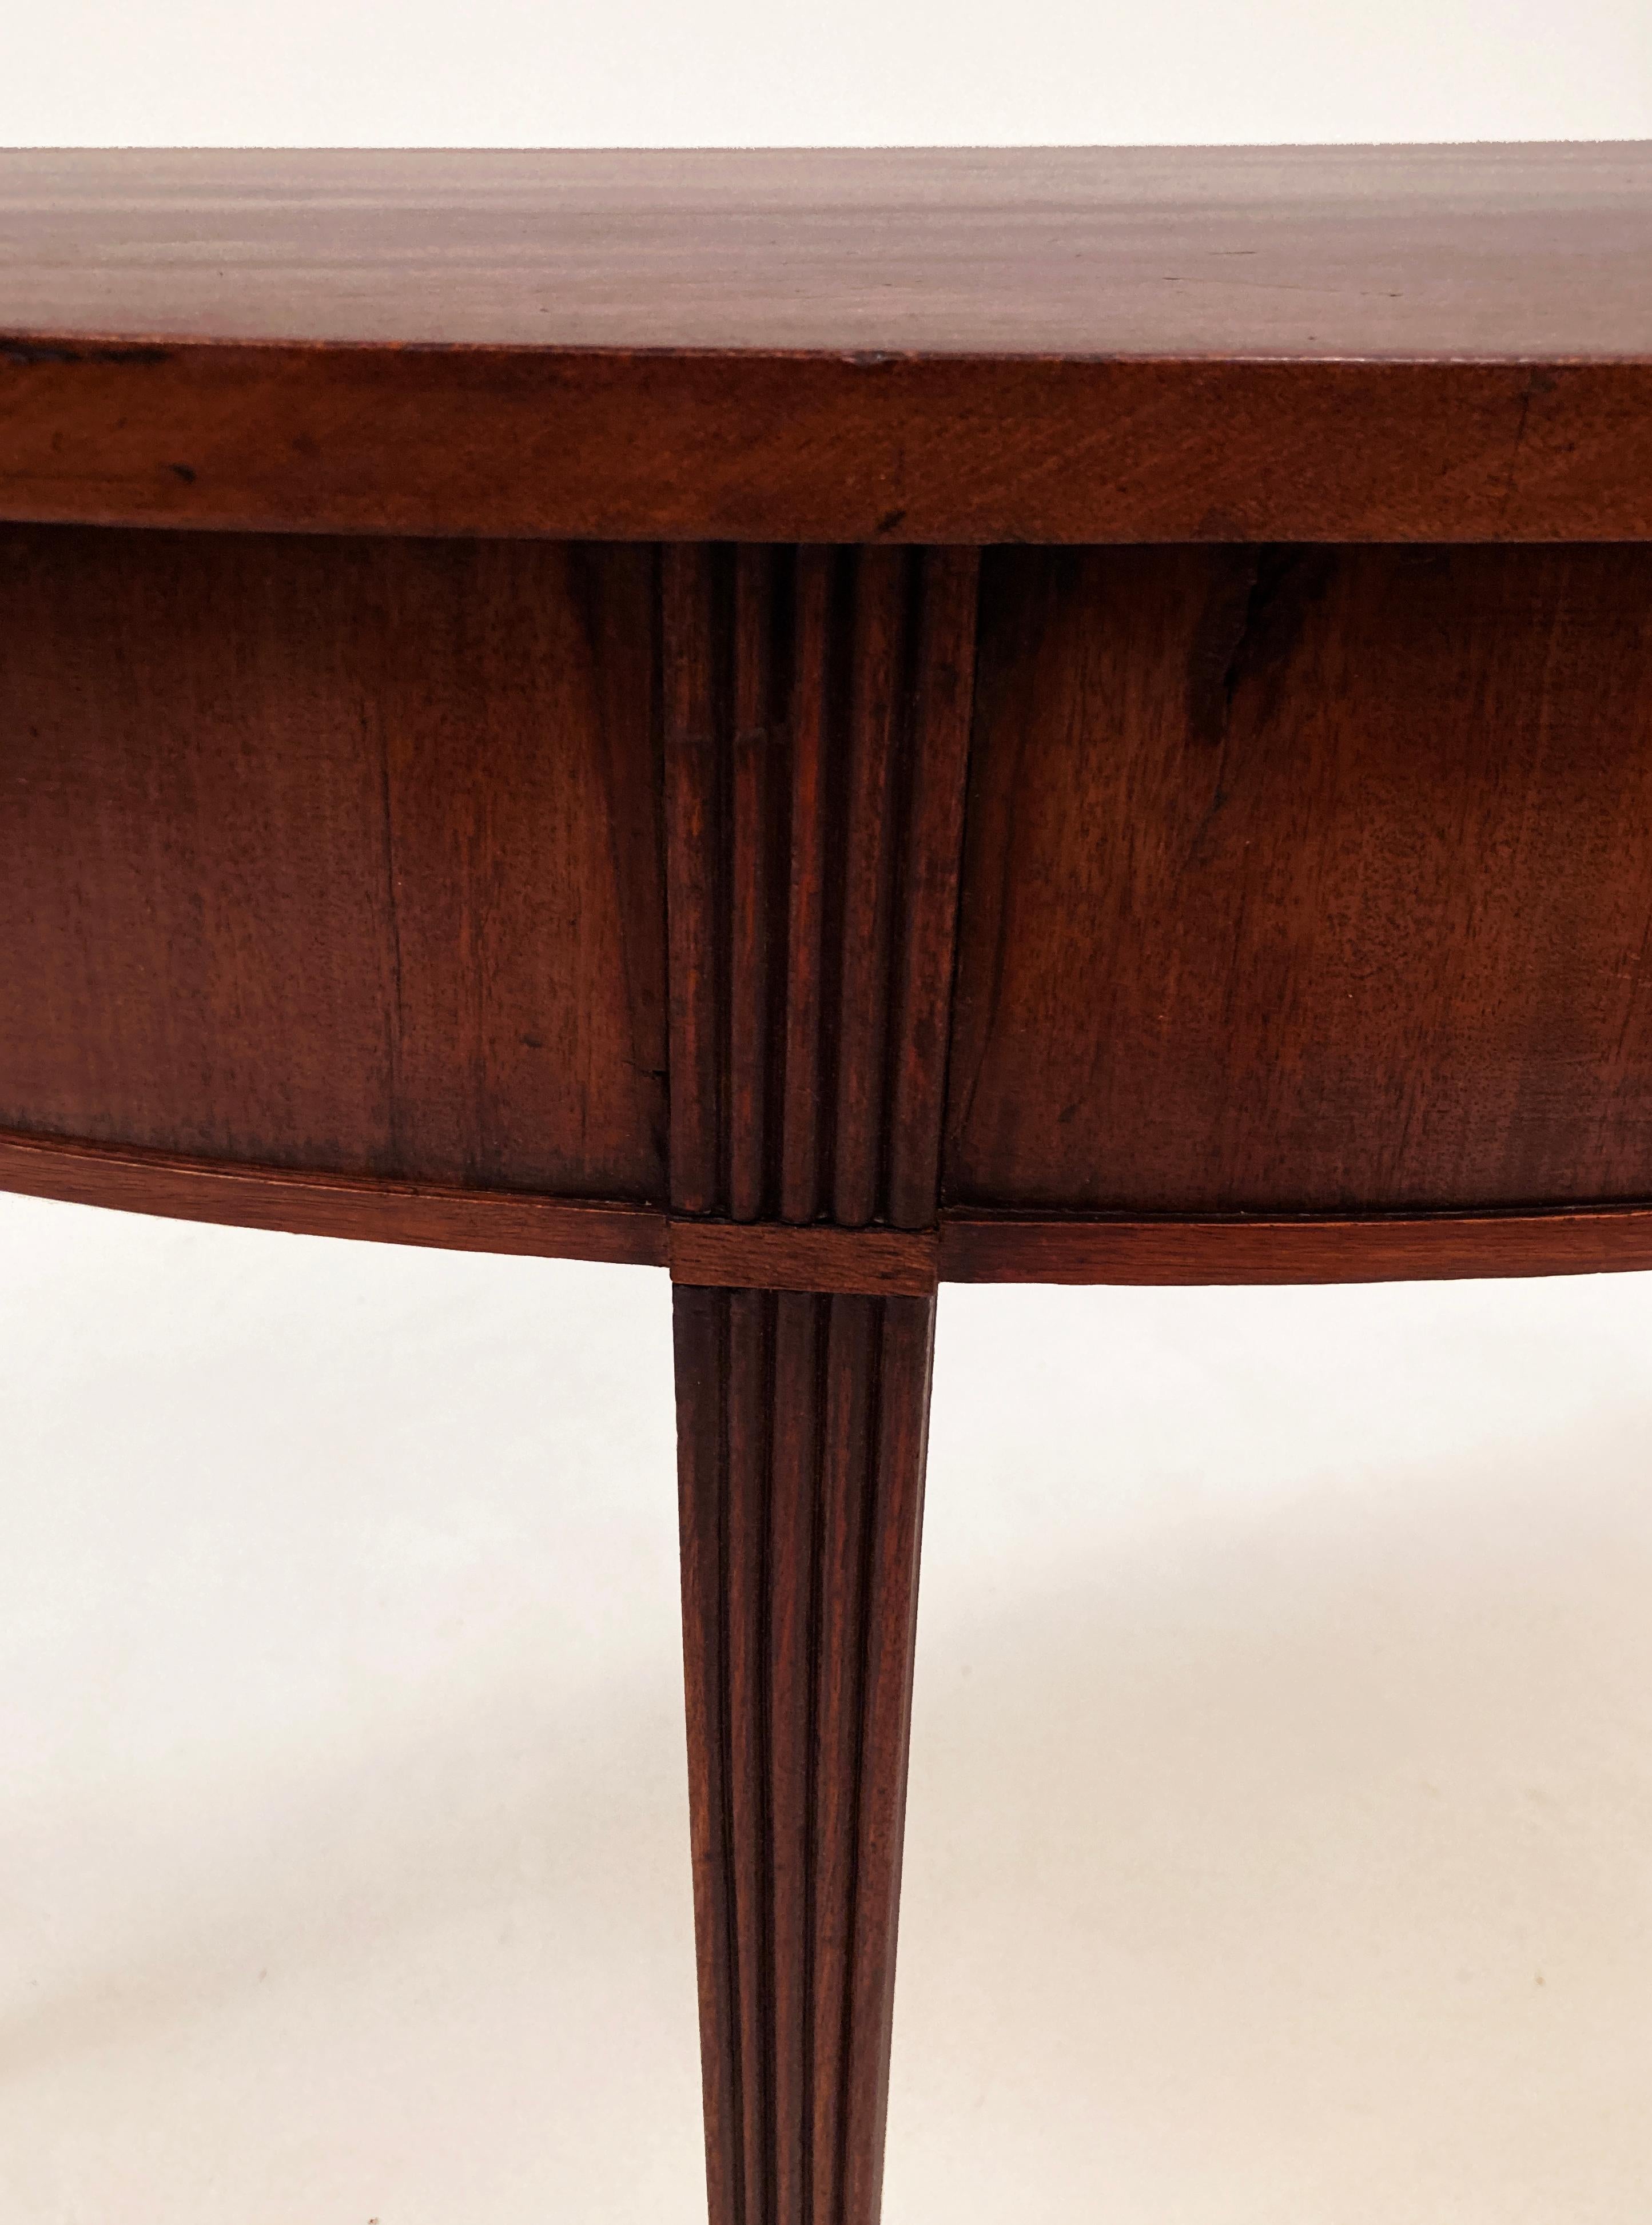 This lovely early 19th century, English mahogany demi-lune table came from the estate of a prominent southern family in Louisville, Kentucky. This table is estimated to have been built in the early 1800's. The beautiful figured top of this Georgian